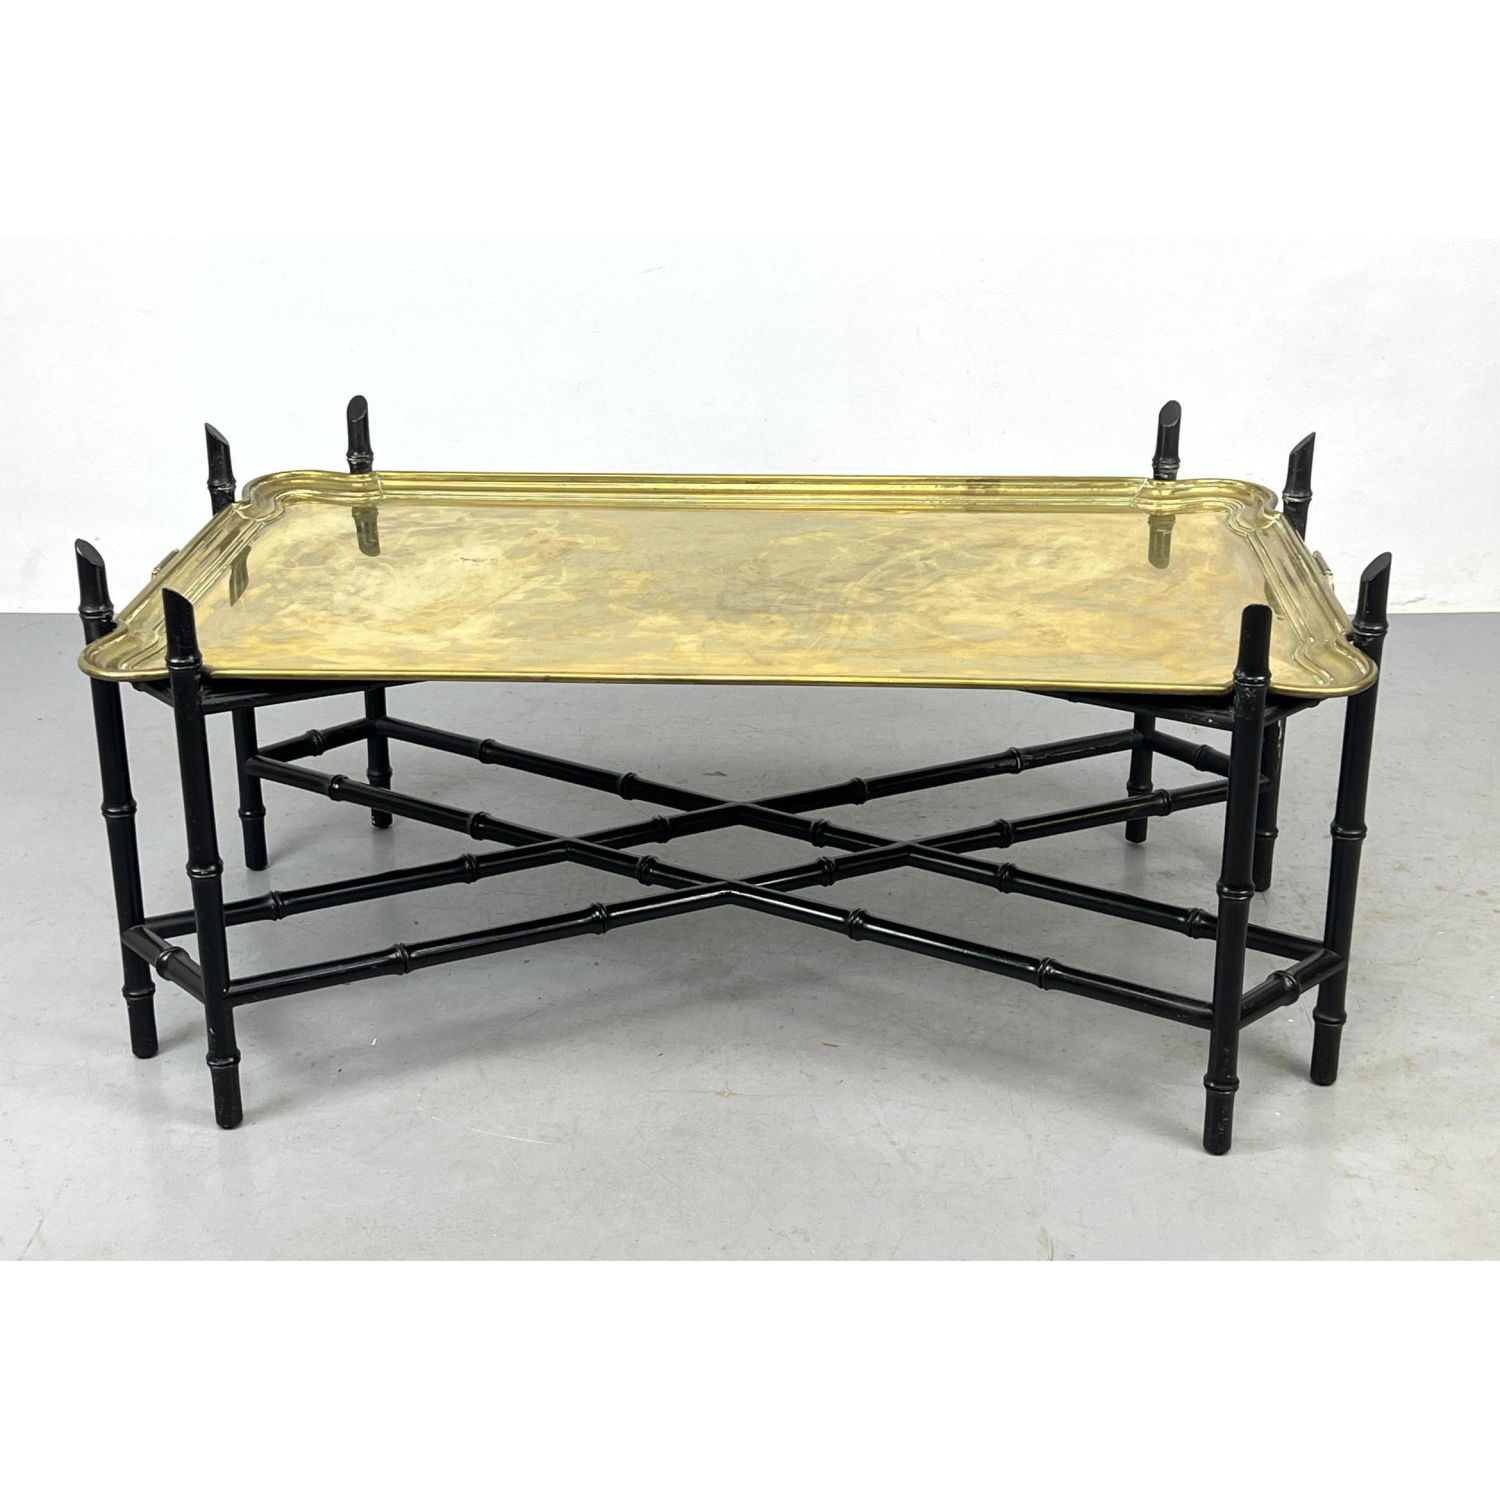 Baker style Brass Tray Top Table.